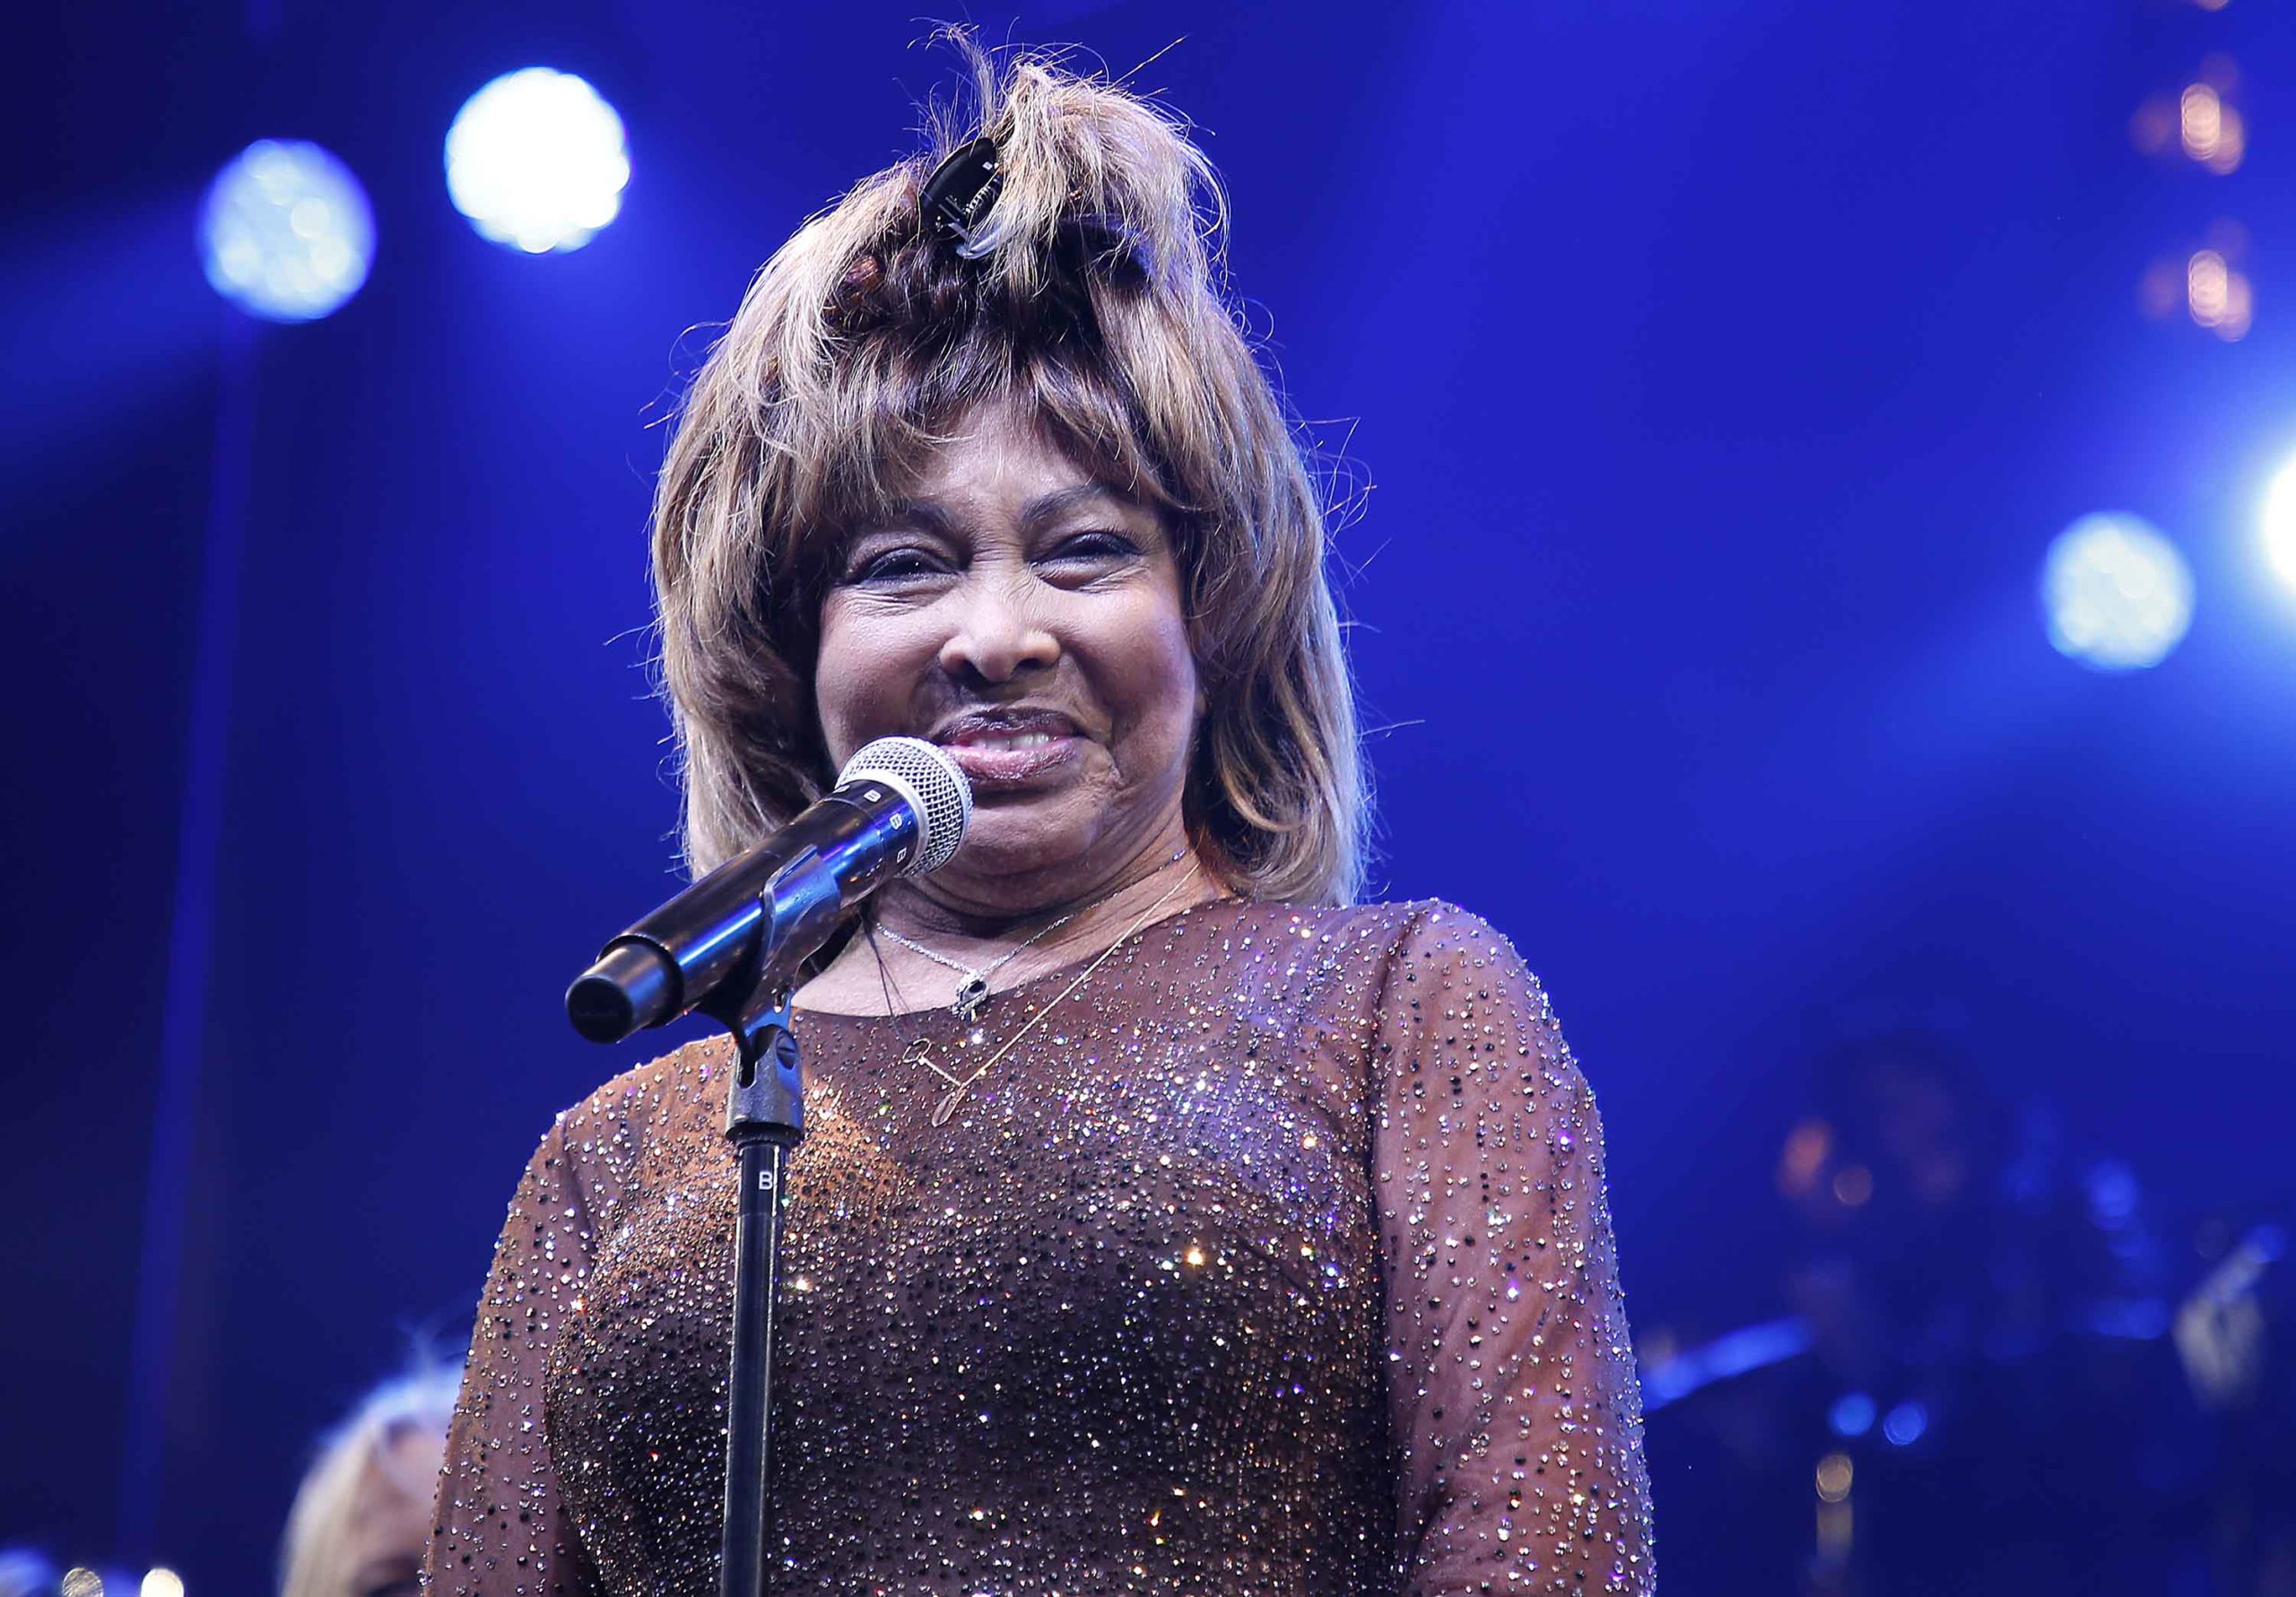 Tina Turner during an Interview with Oprah in 2005 Recalls Her First Love from Nutbush with Sparkling Eyes!